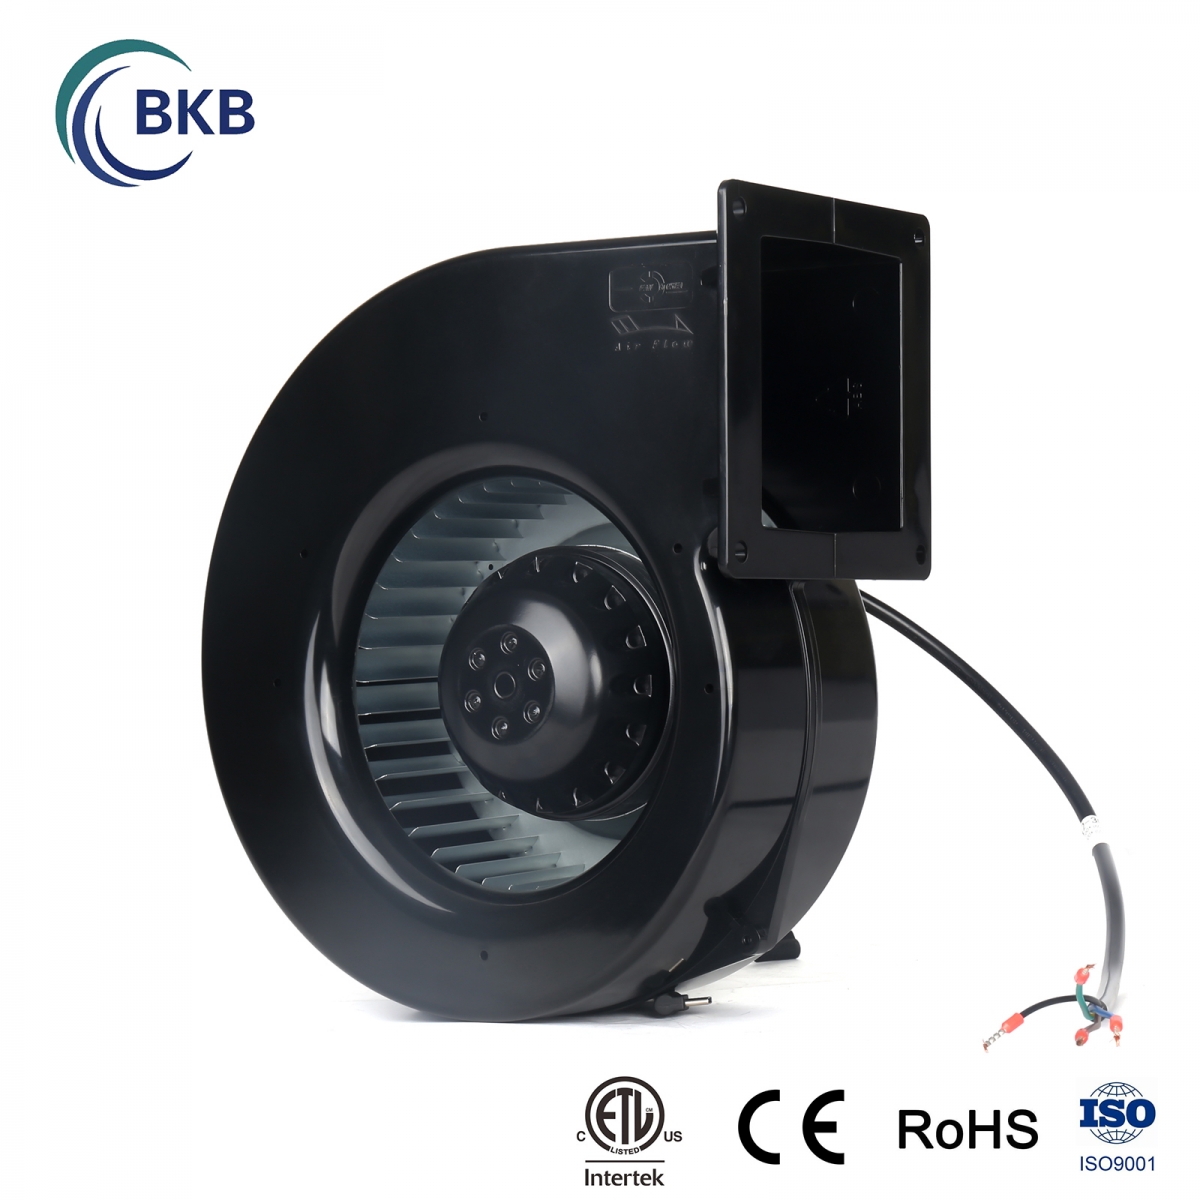 ETL LISTED Plastic SINGLE INLET centrifugal fan SUPPLIER AND FACTORY IN CHINA . HIGH PERFORMANCE.-SUNLIGHT BLOWER,Centrifugal Fans, Inline Fans,Motors,Backward curved centrifugal fans ,Forward curved centrifugal fans ,inlet fans, EC fans